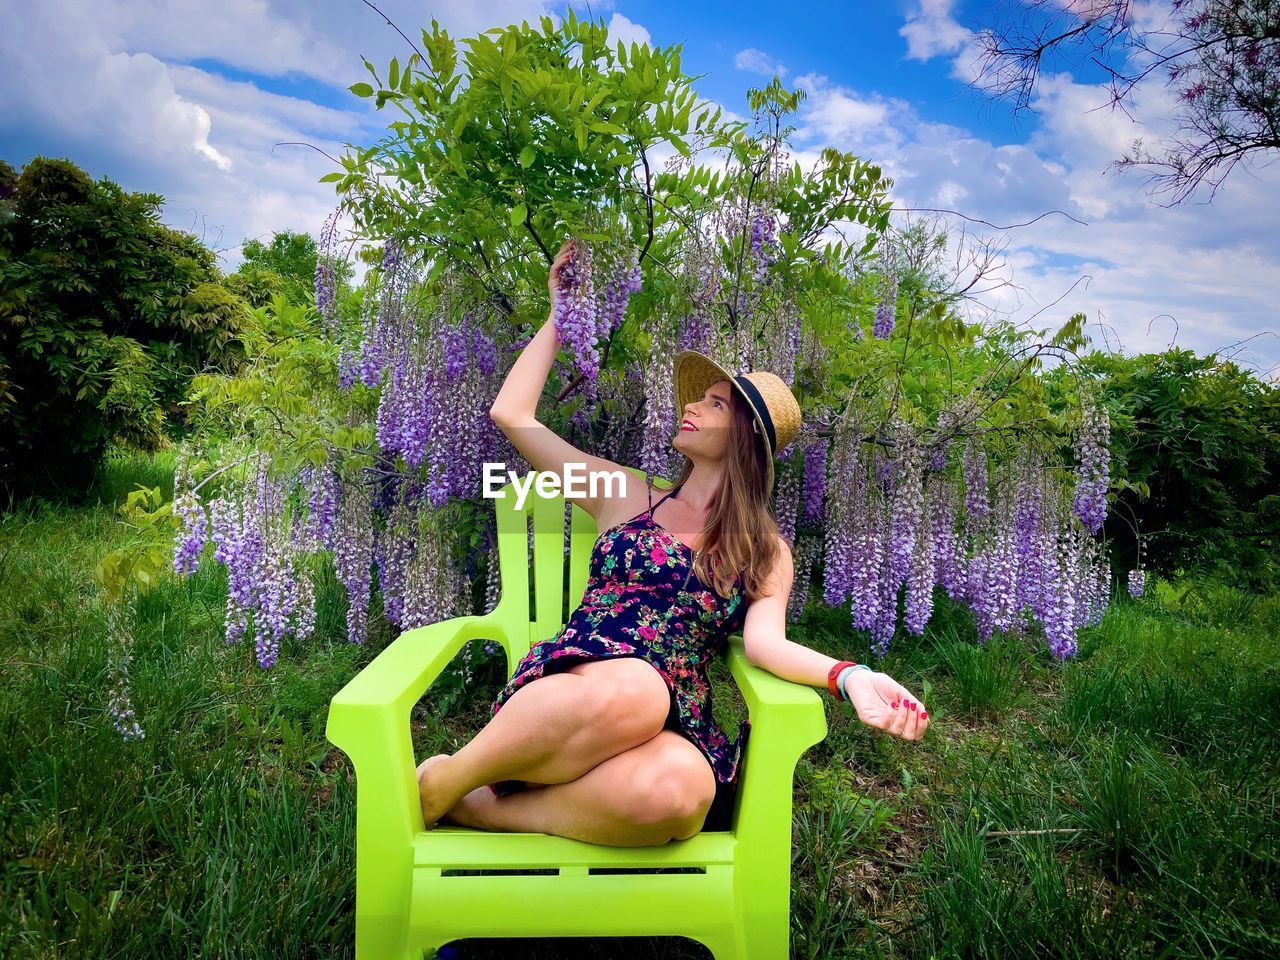 Young woman wearing dress and hat sitting down on a green chair near wisteria flowers